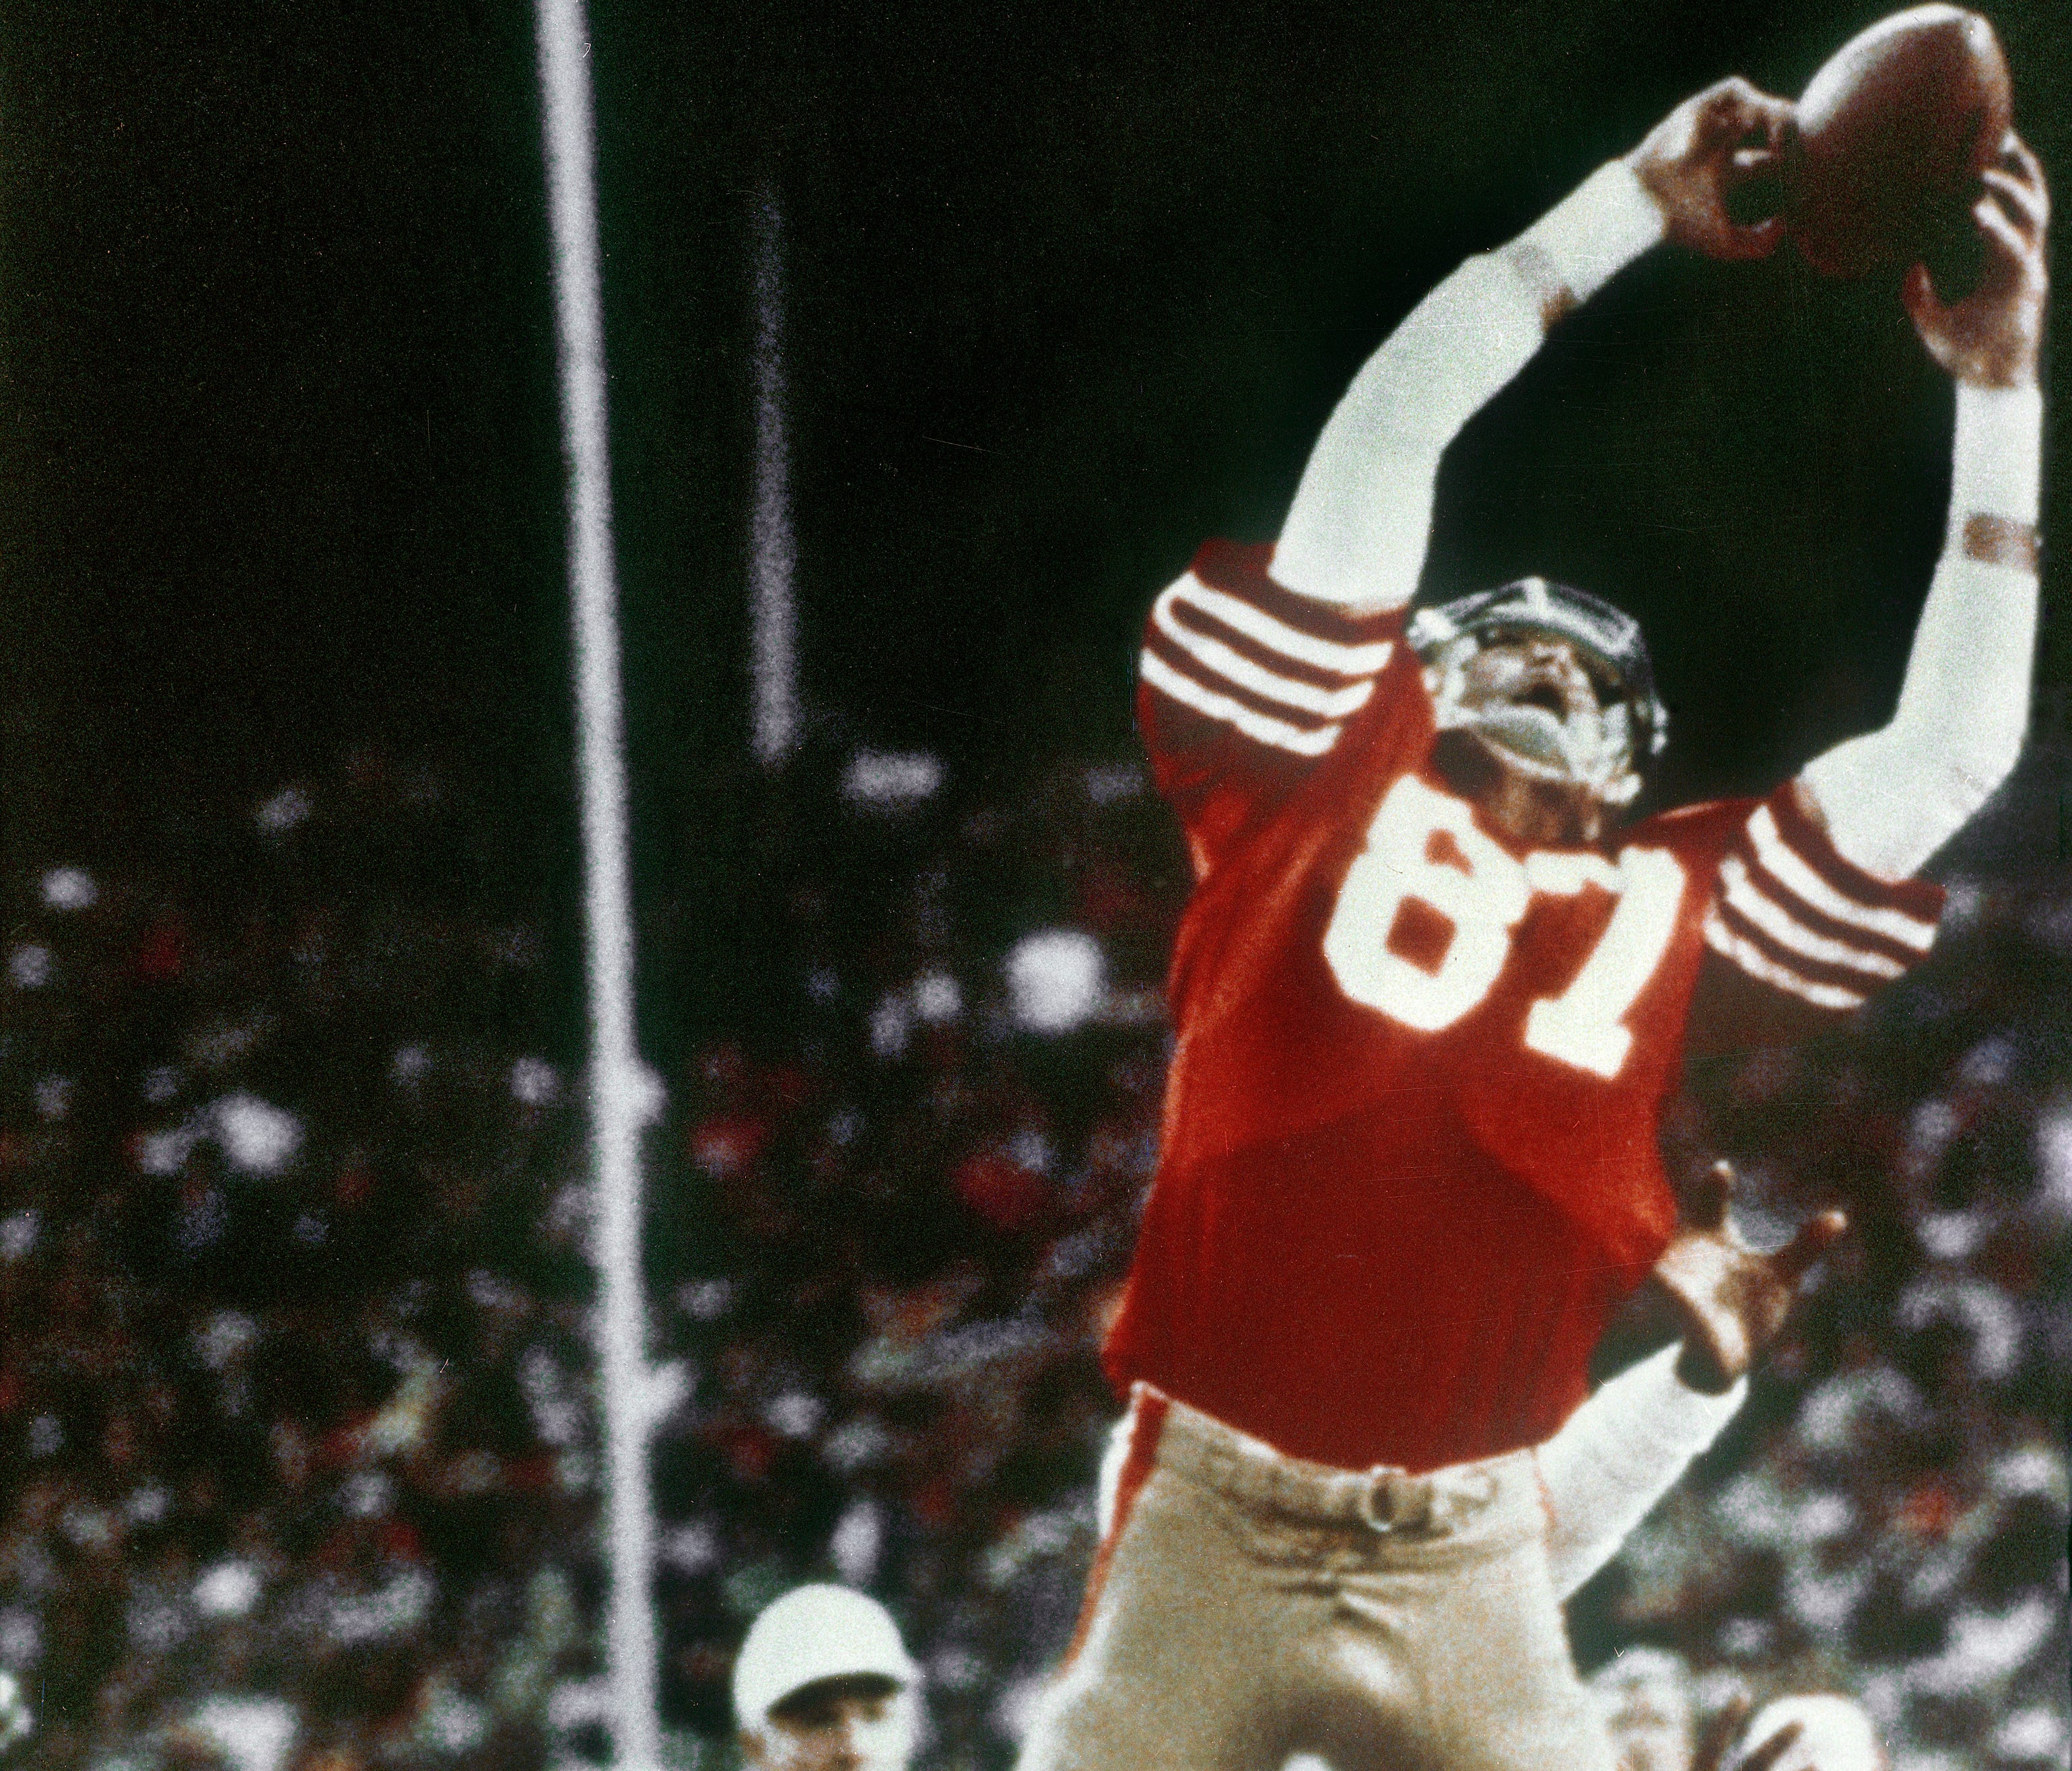 Dwight Clark, who made one of the most famous plays in NFL history with 